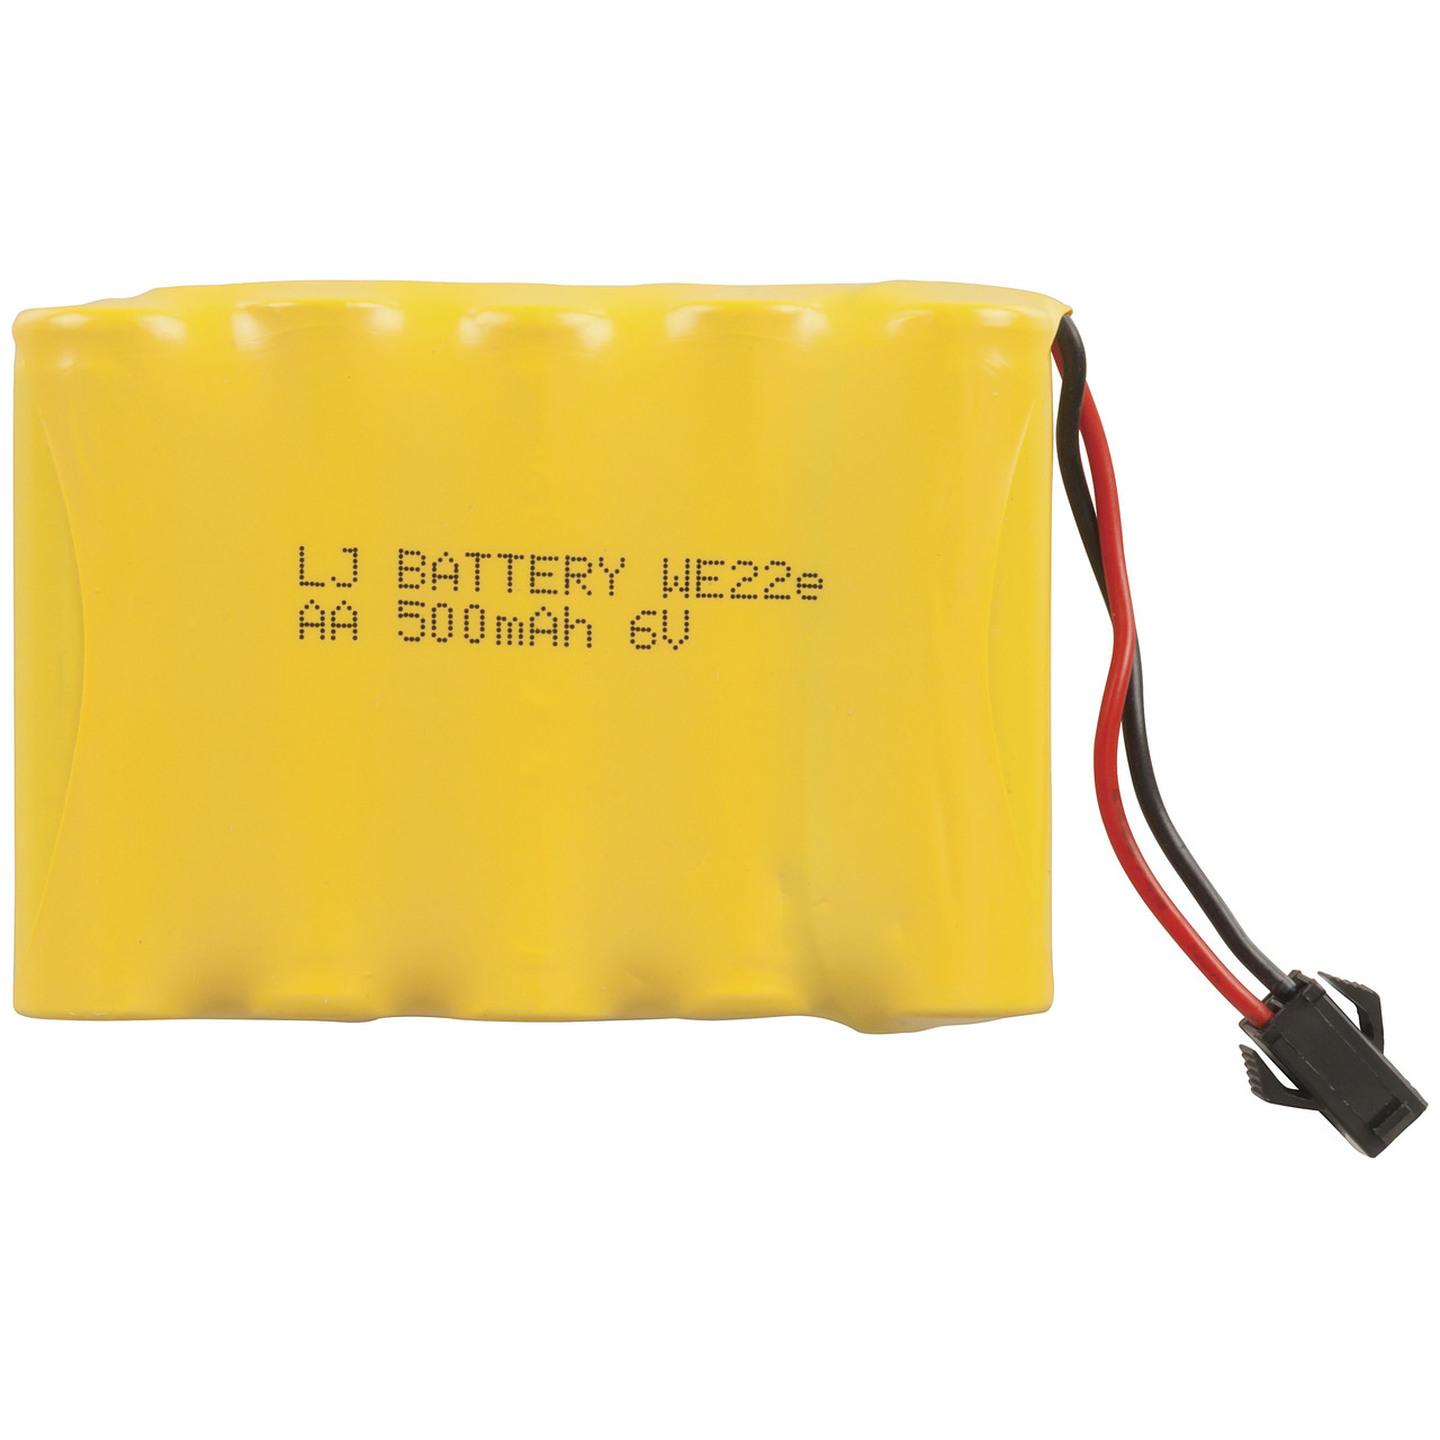 Spare Ni-Cd Battery to suit GT4270/GT4290 R/C Car